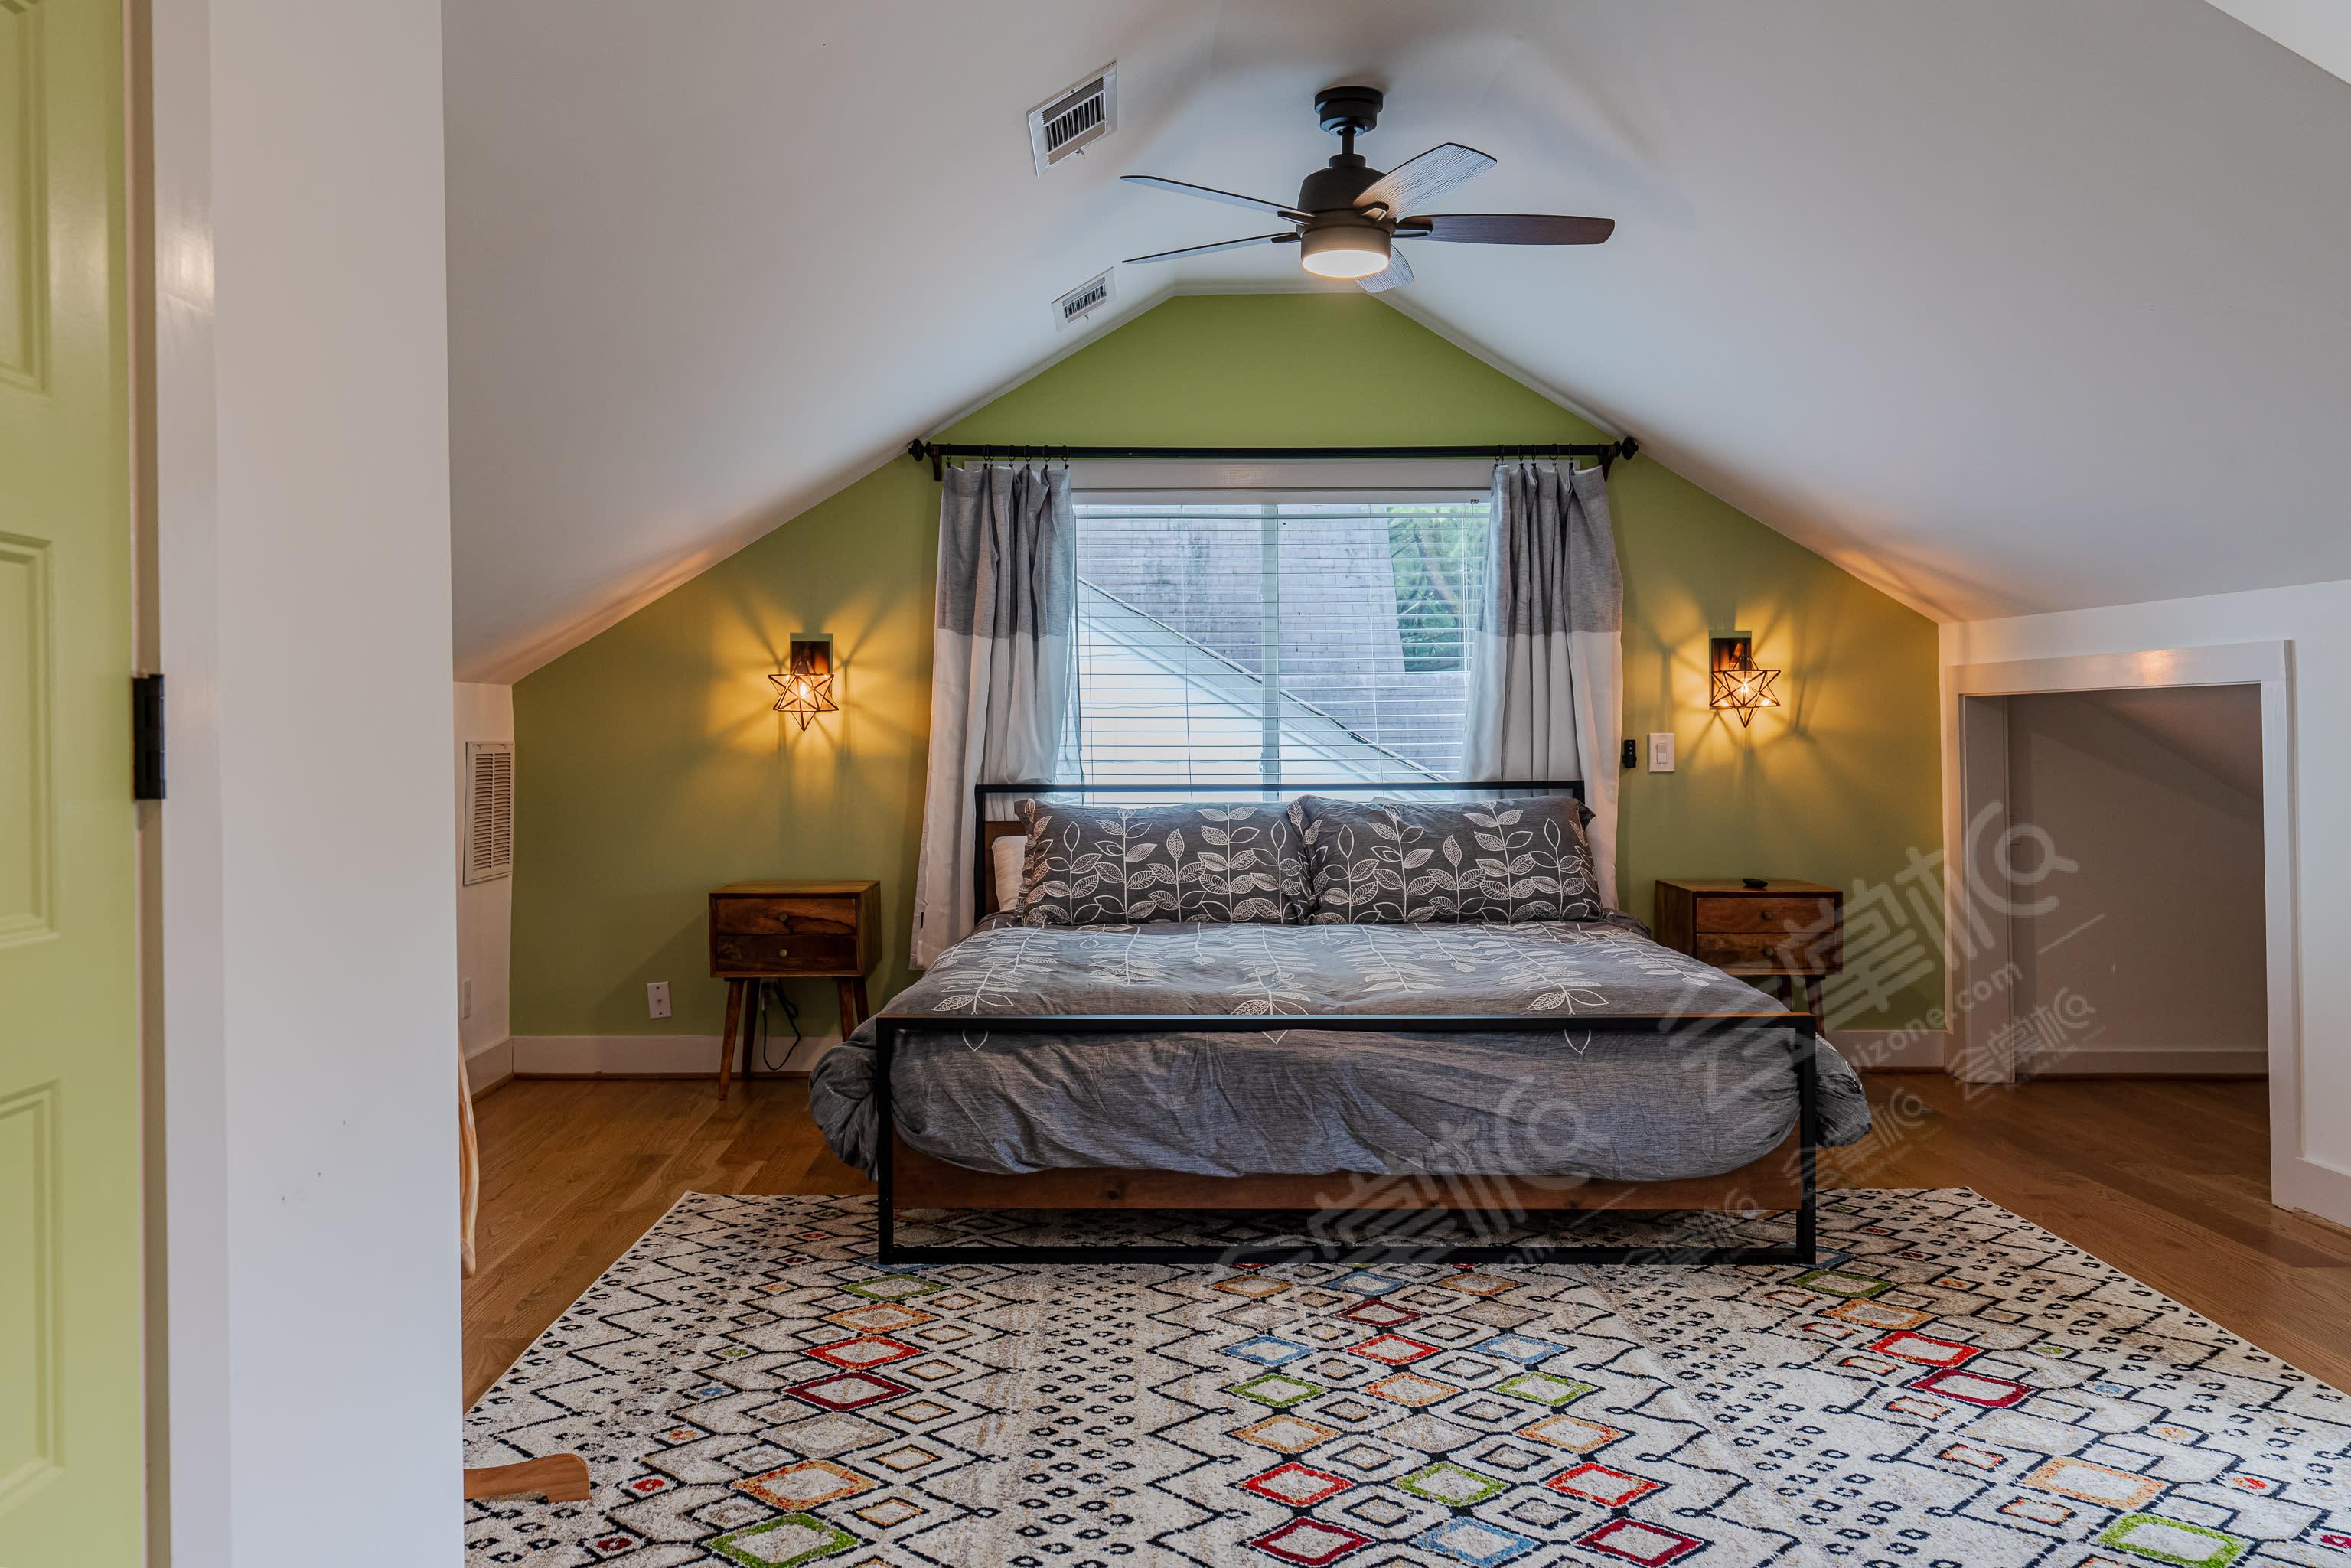 Bohemian Chic Bungalow on the Beltline near Ansley Park